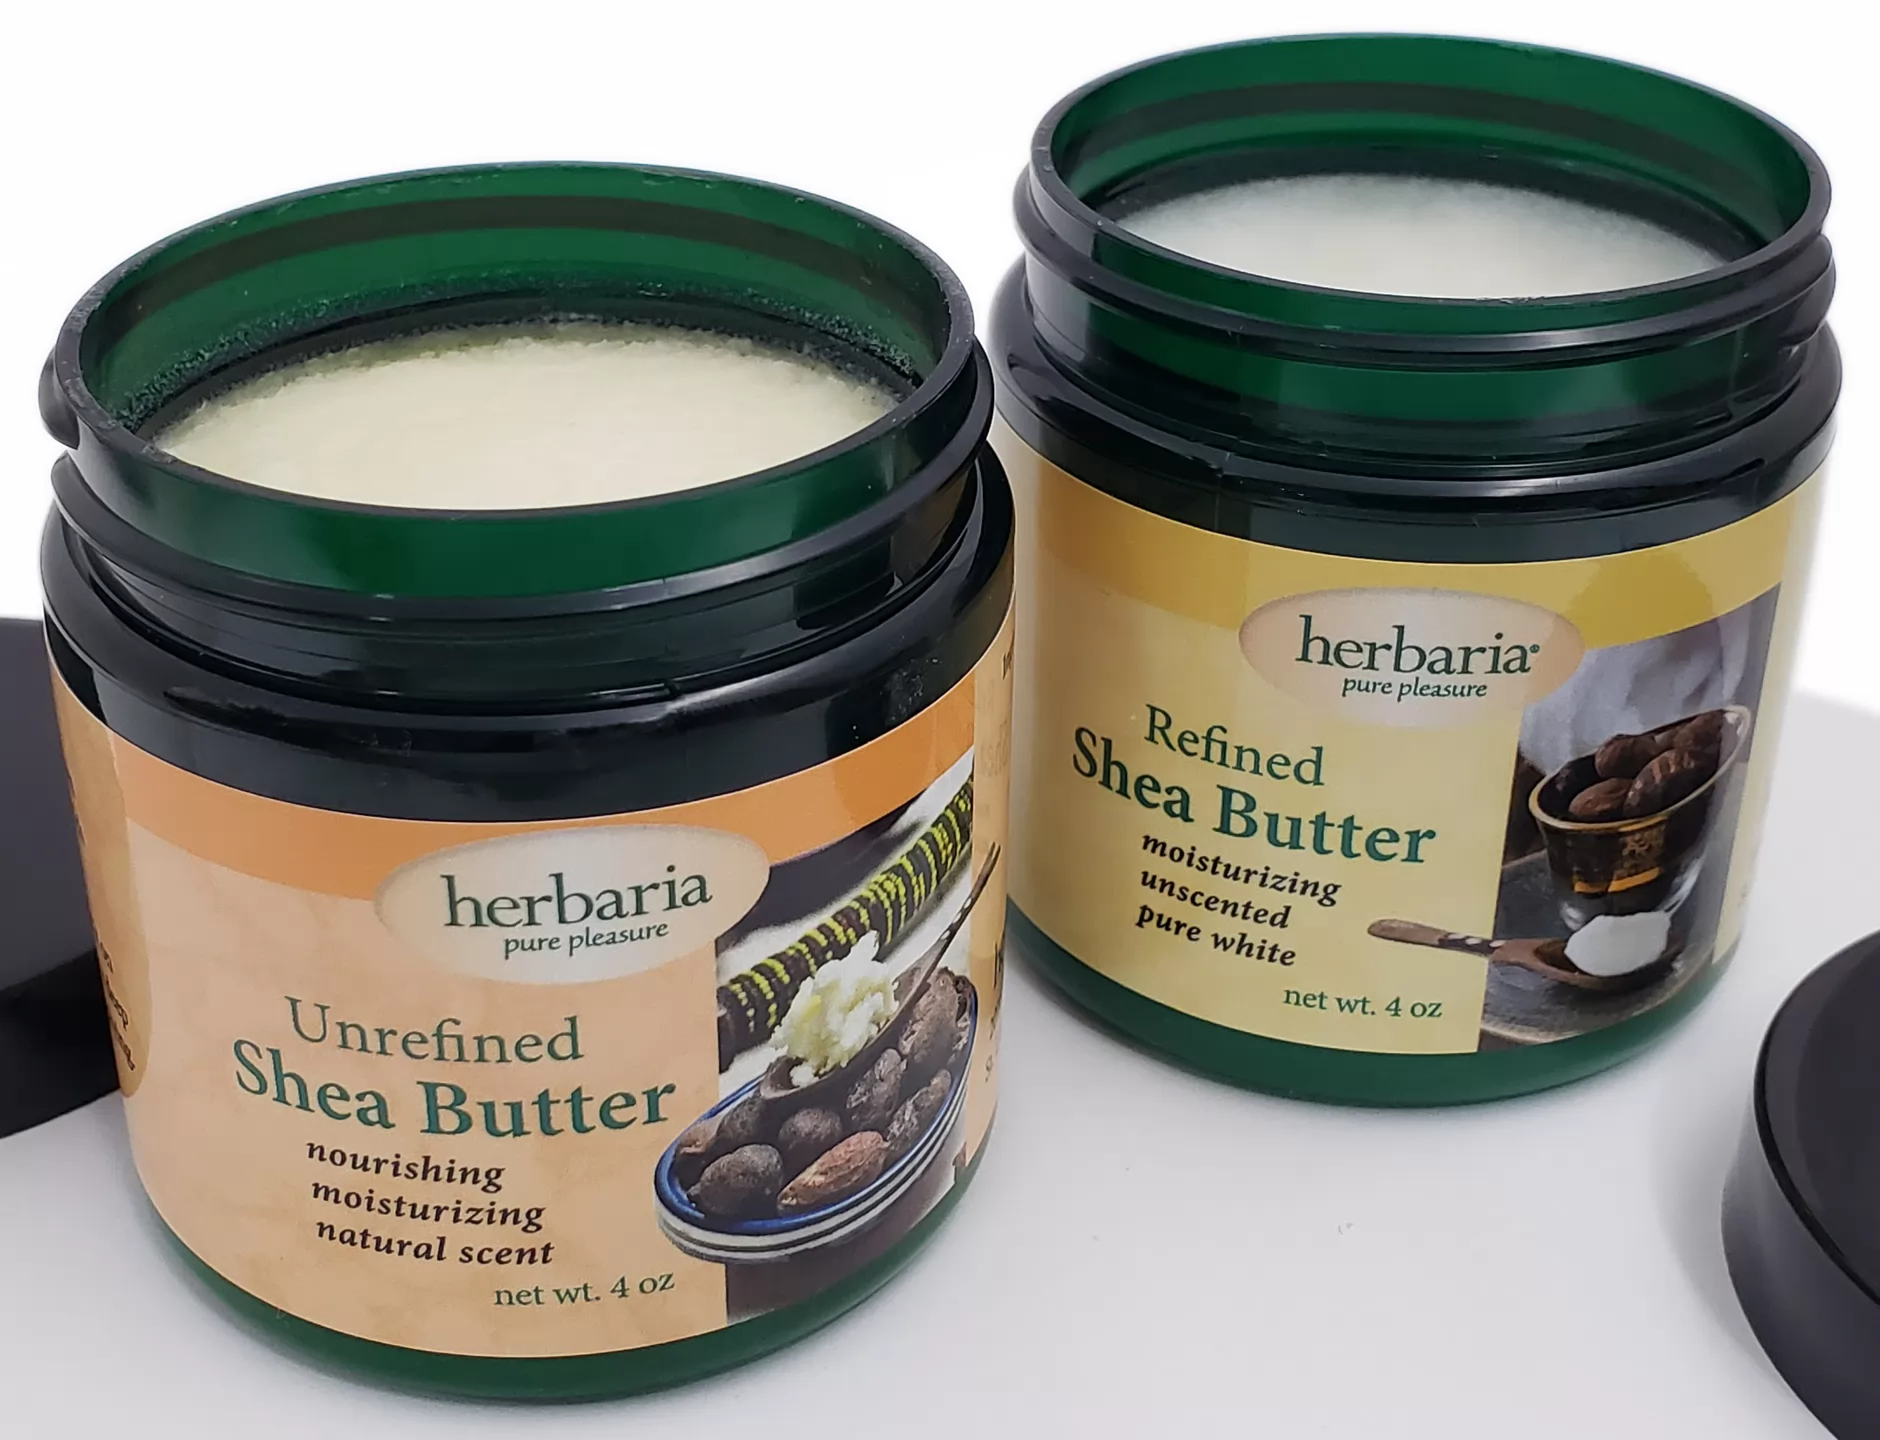 Herbaria Shea Butter - Refined and Unrefined